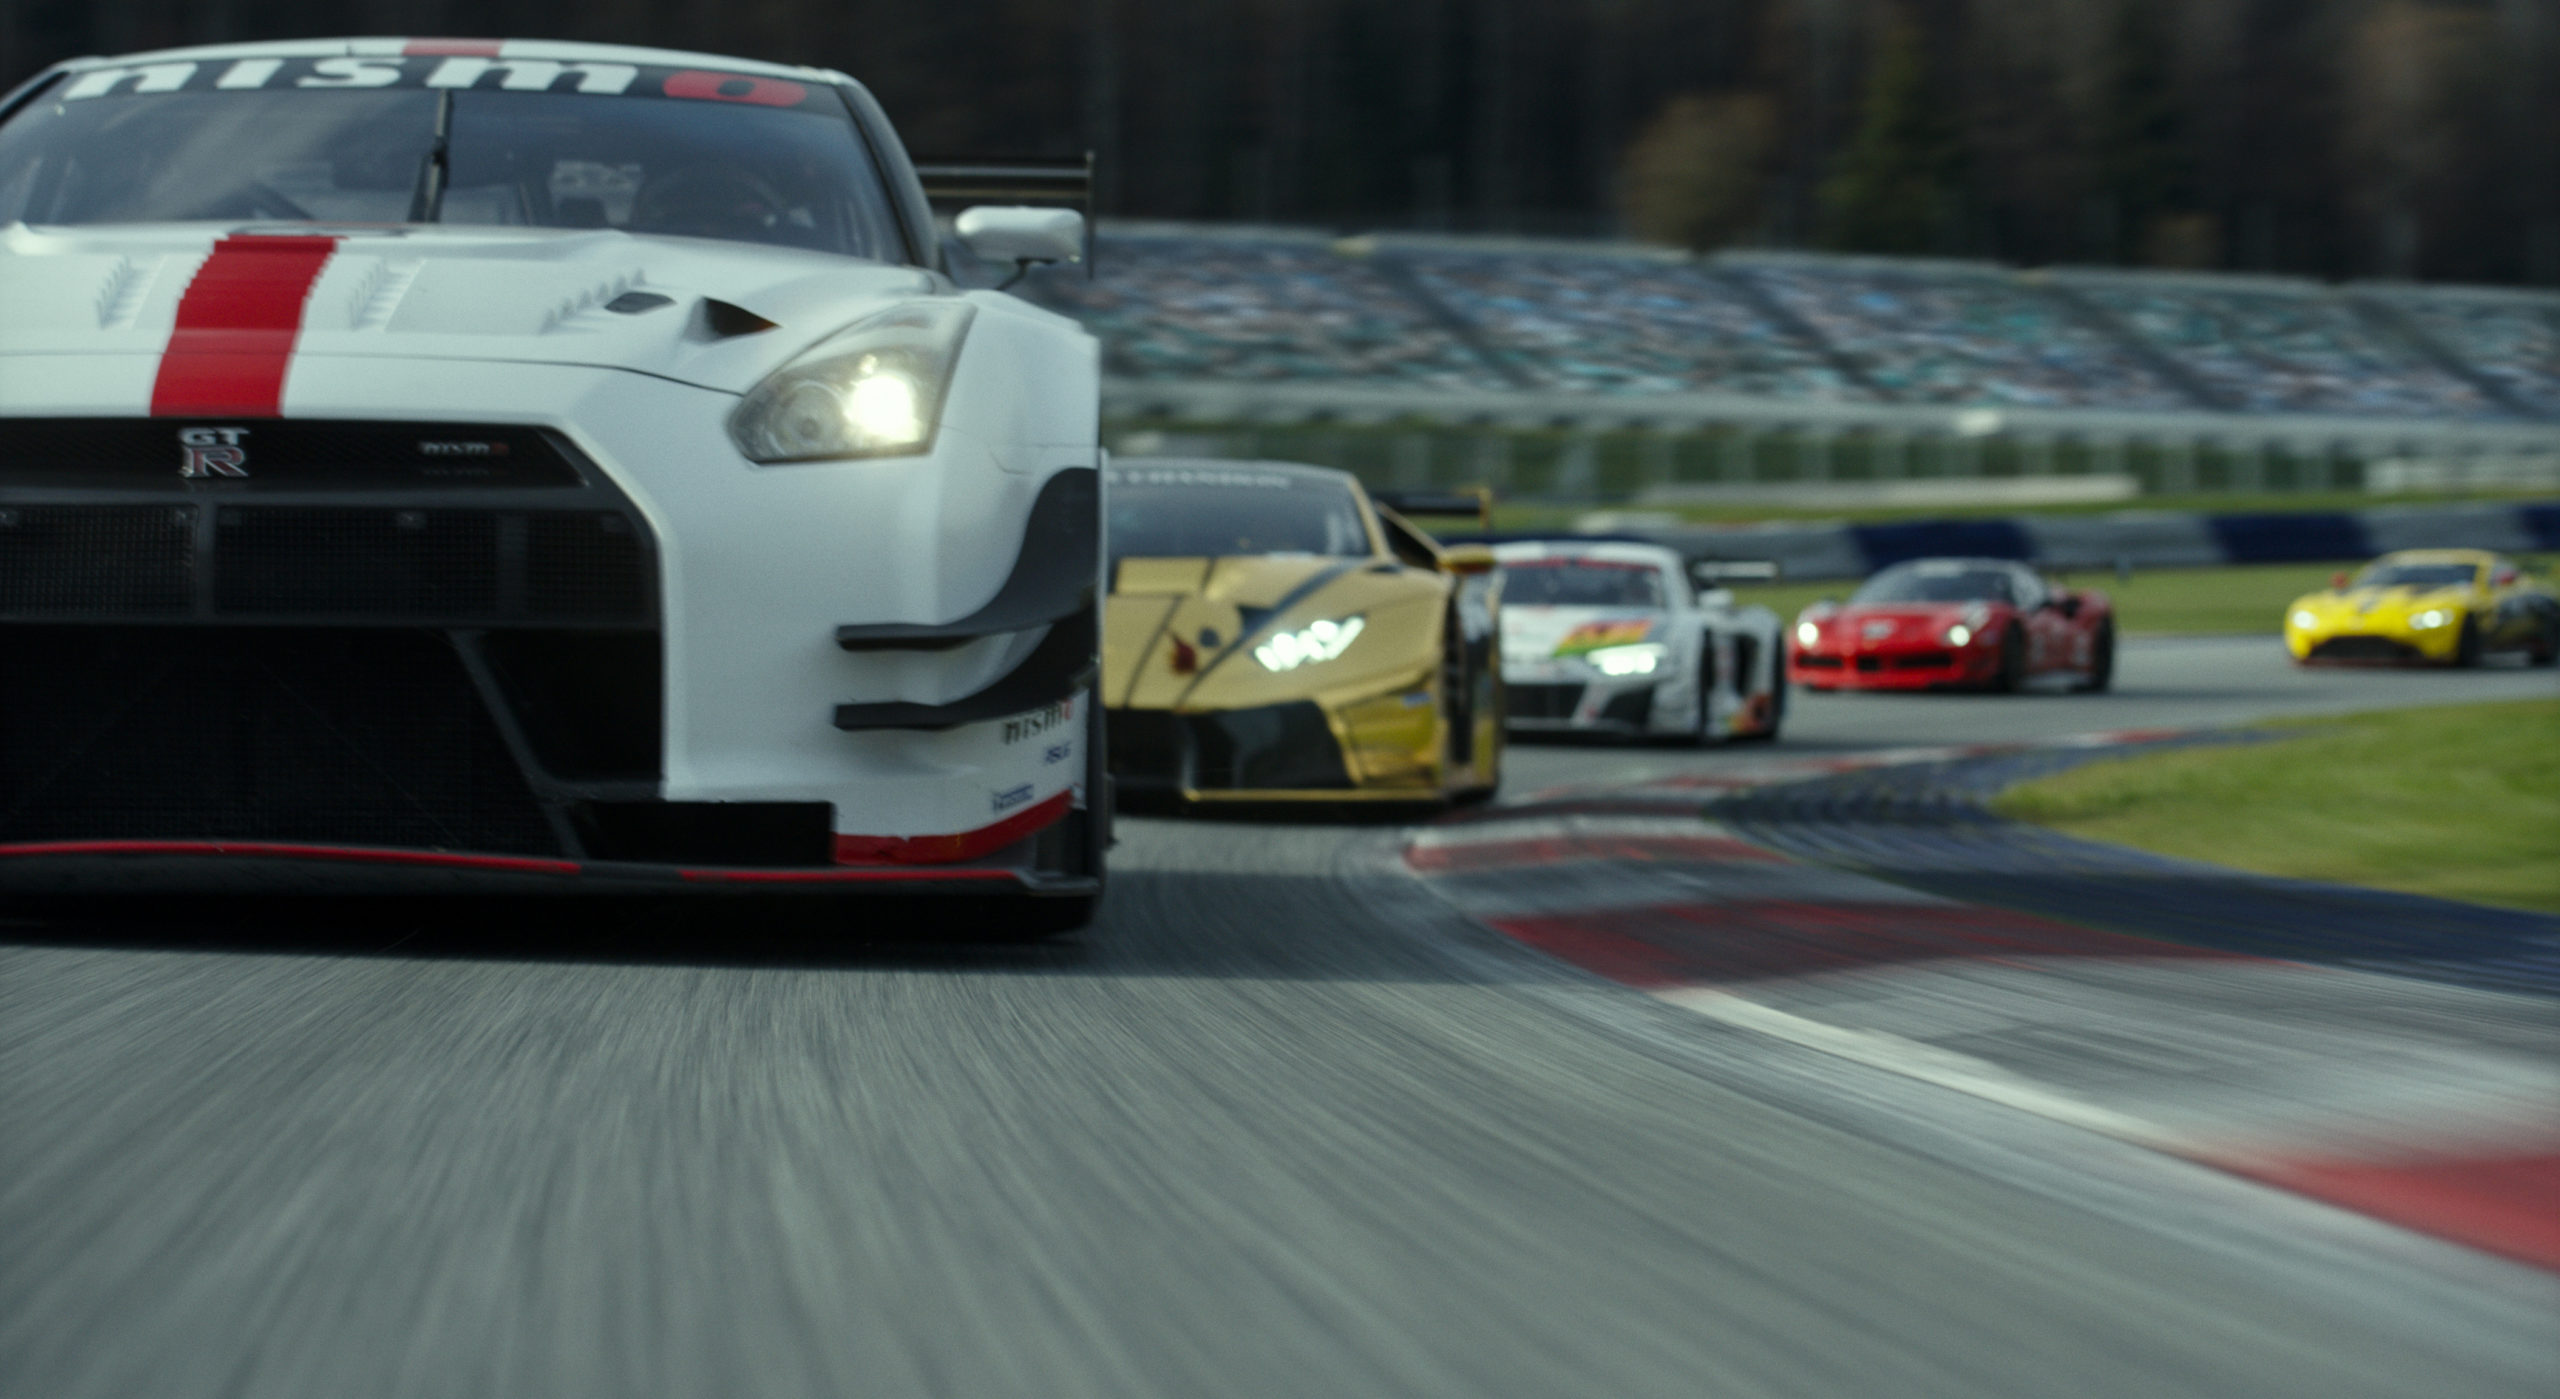 archie madekwe, darren cox, gran turismo, gt academy, jann mardenborough, orlando bloom, video games, gran turismo movie review: there's heart in this gamer-to-racer film